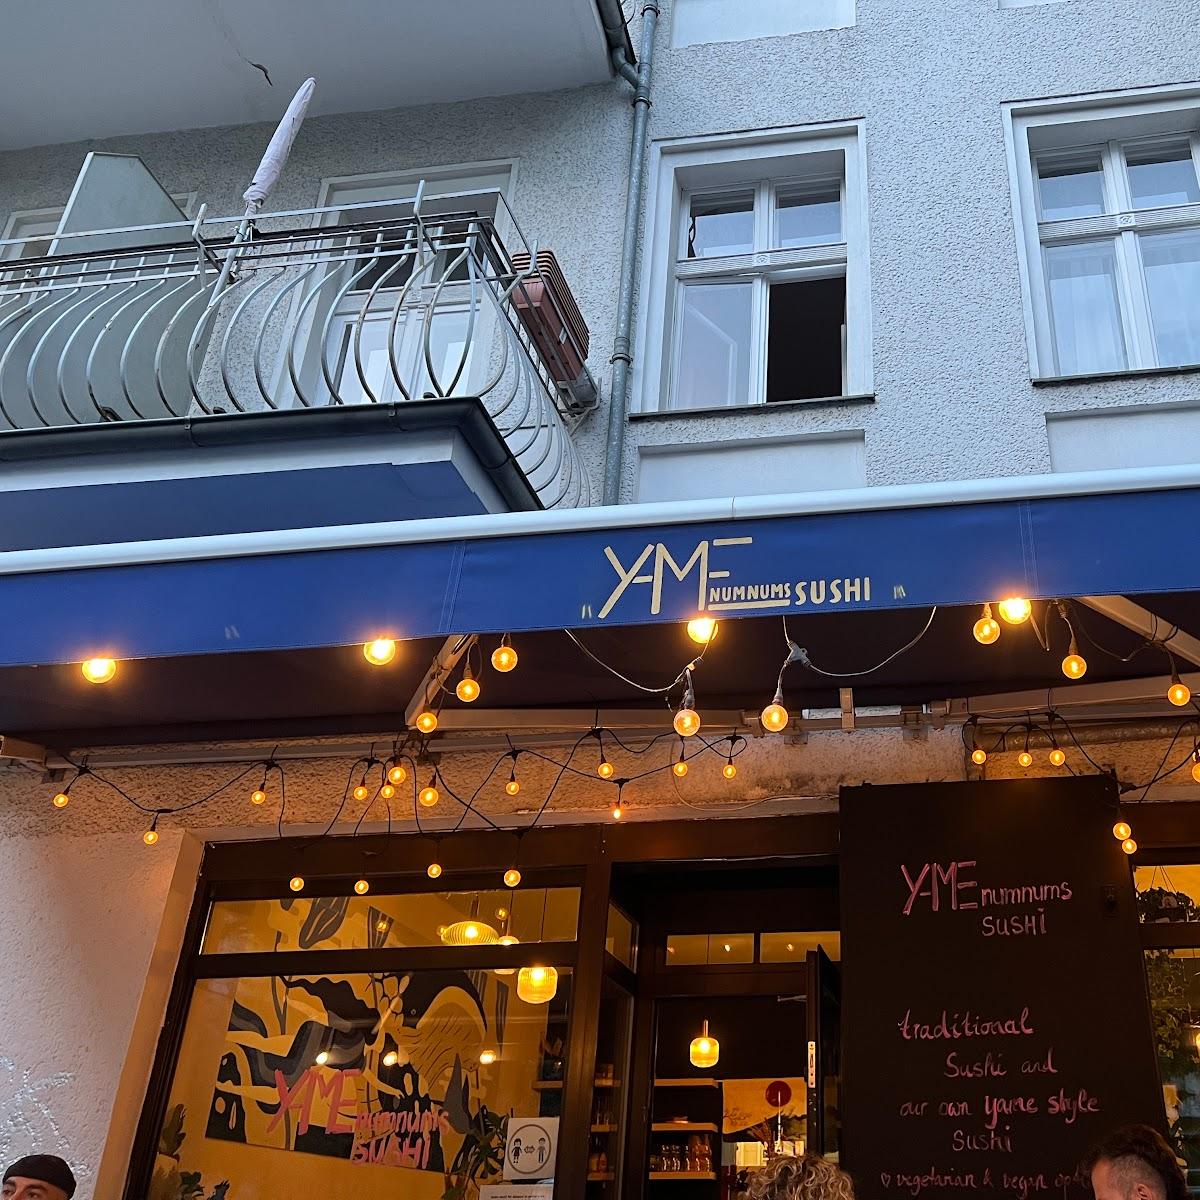 Restaurant "YaMe NumNums homemade UDON & sushi NOBRUNCH" in Berlin